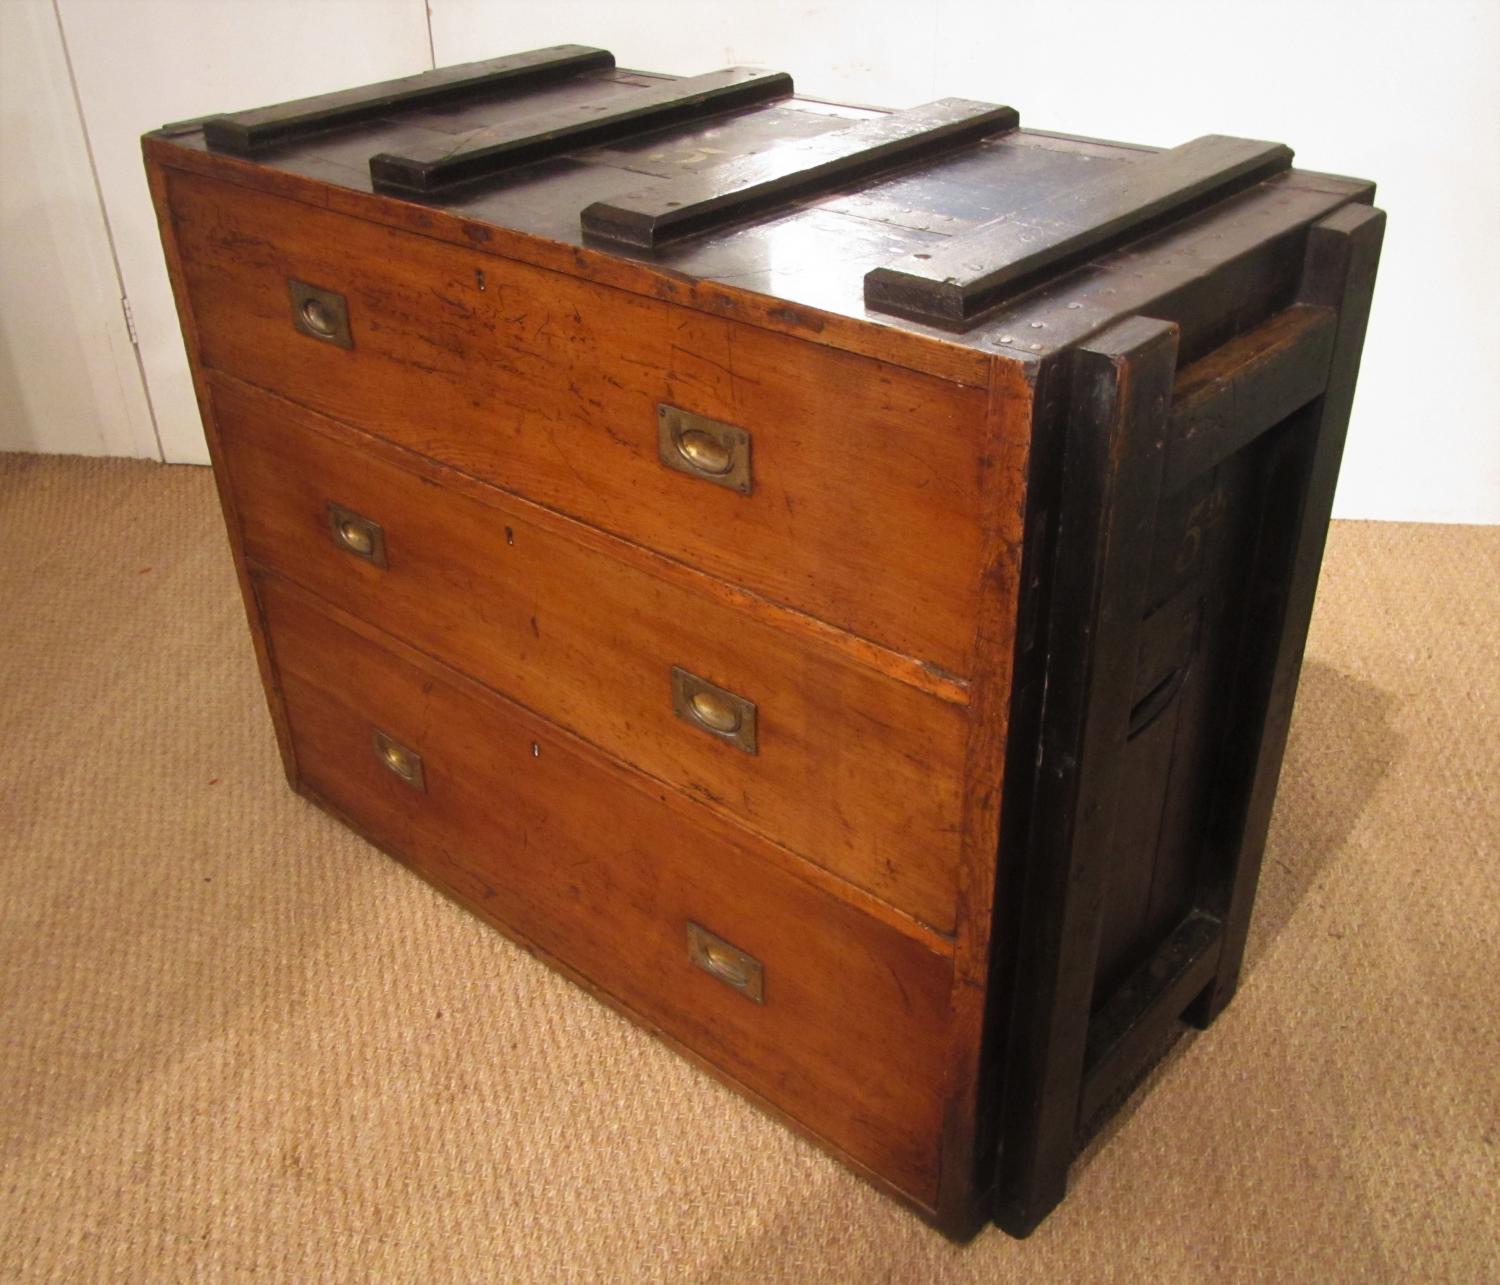 A Campaign chest of drawers